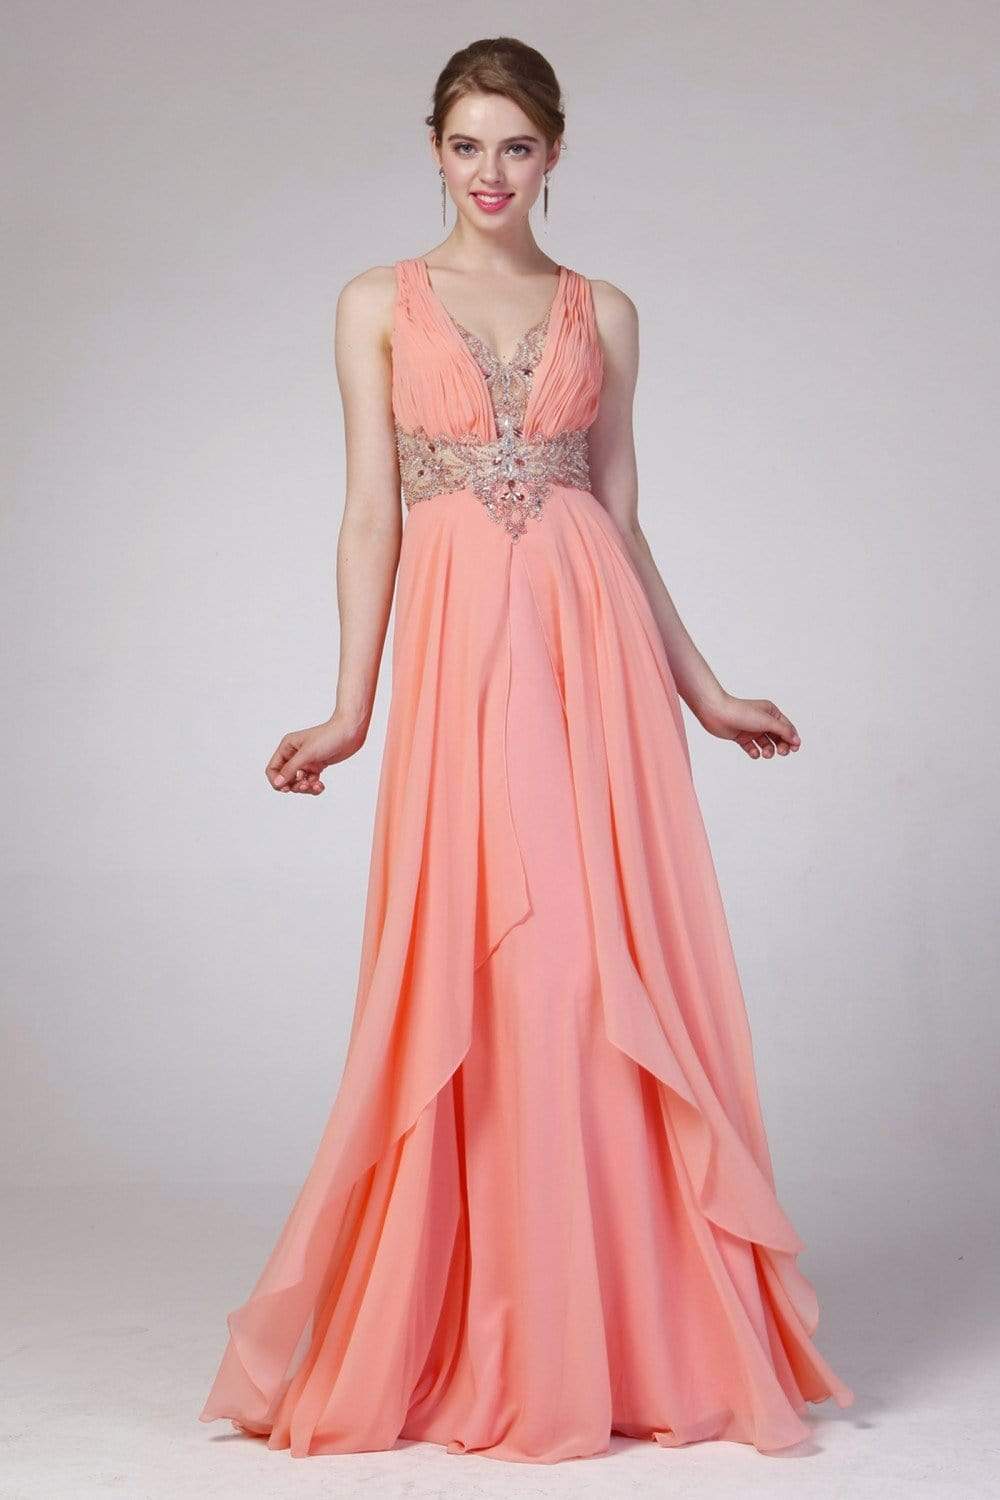 Cinderella Divine - Sleeveless Embellished Ruched A-line Dress Special Occasion Dress 2 / Coral